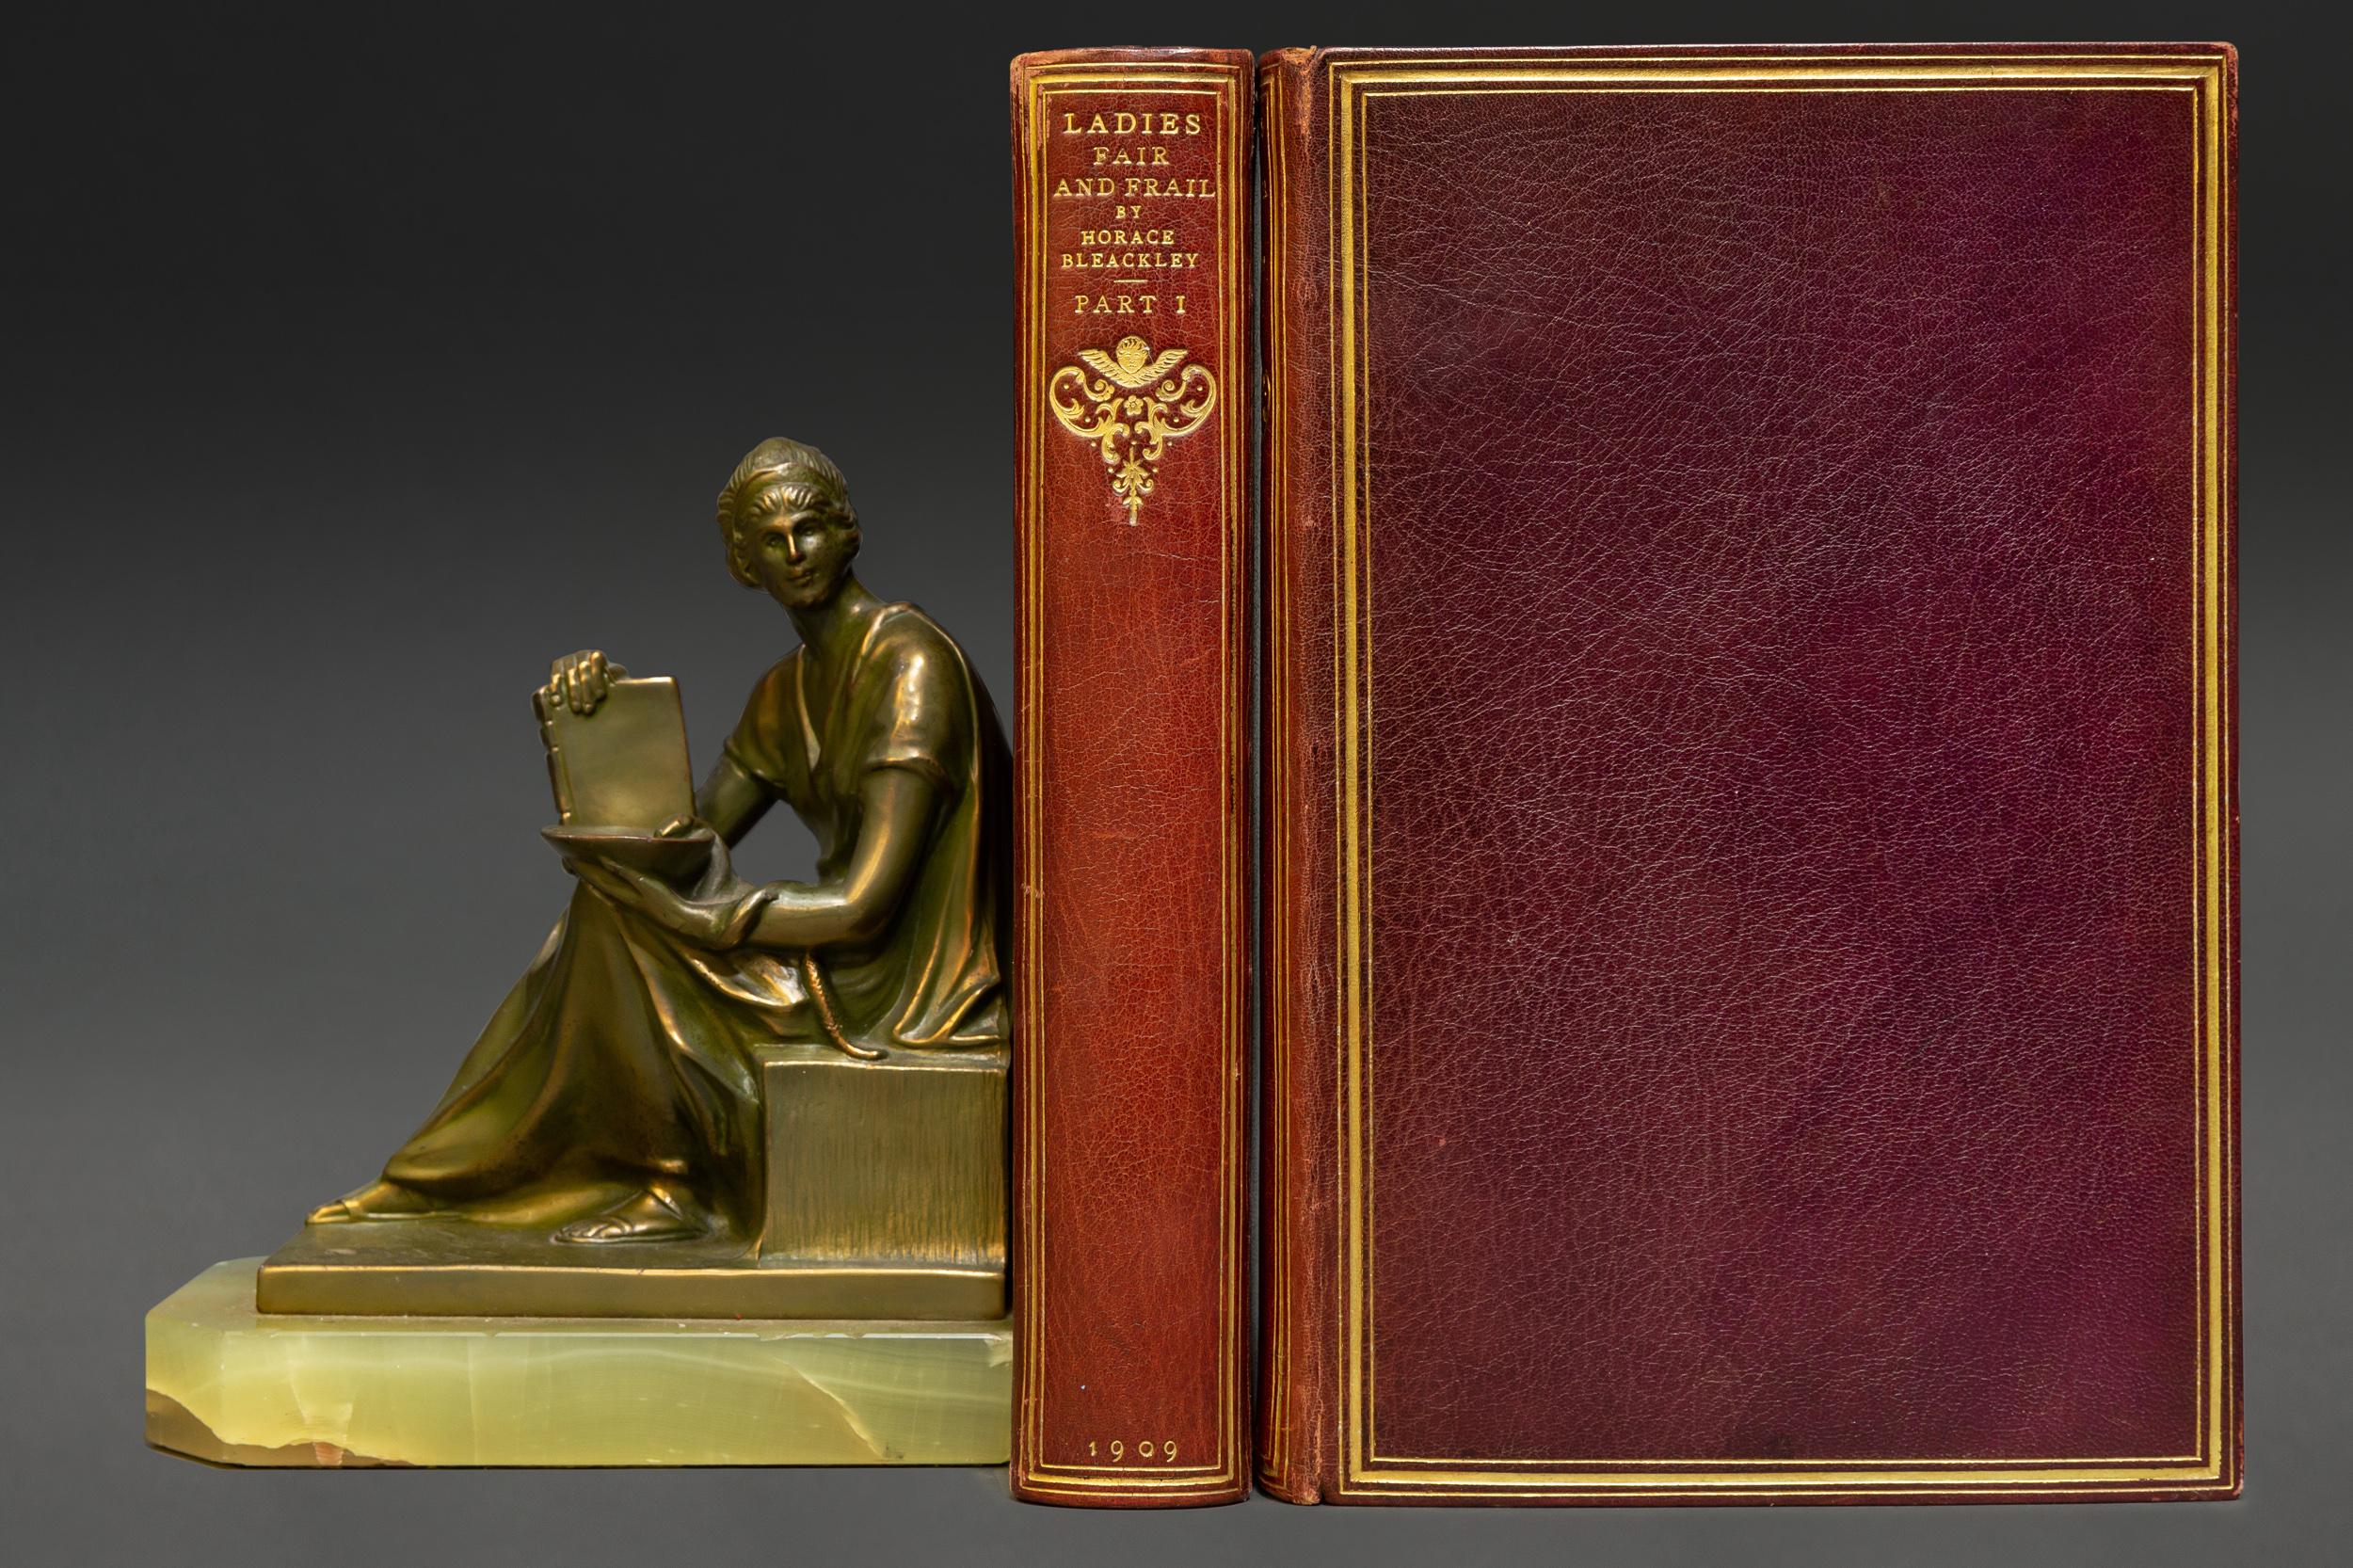 2 volumes. Horace Bleackley. Ladies Fair and Frail. Sketches of the Demi-Monde during the eighteenth century. Extra illustrated. Bound by Sangorski & Sutcliffe. Bound in purple morocco. All edges gilt. Published: London: John Lane, The Bodley Head.